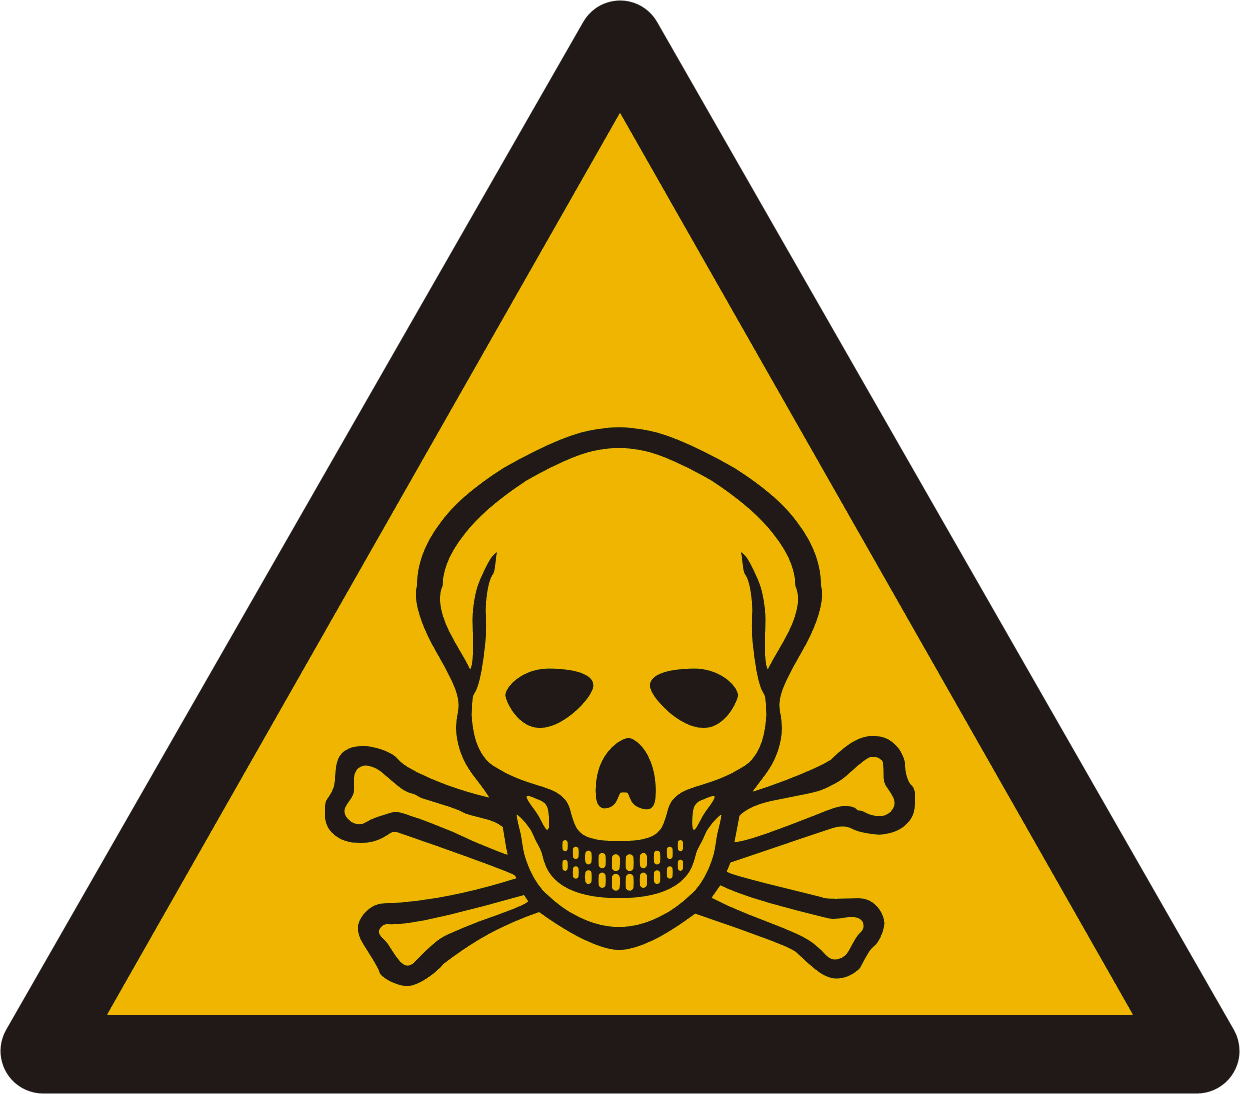 Harmful Warning Sign - ClipArt Best